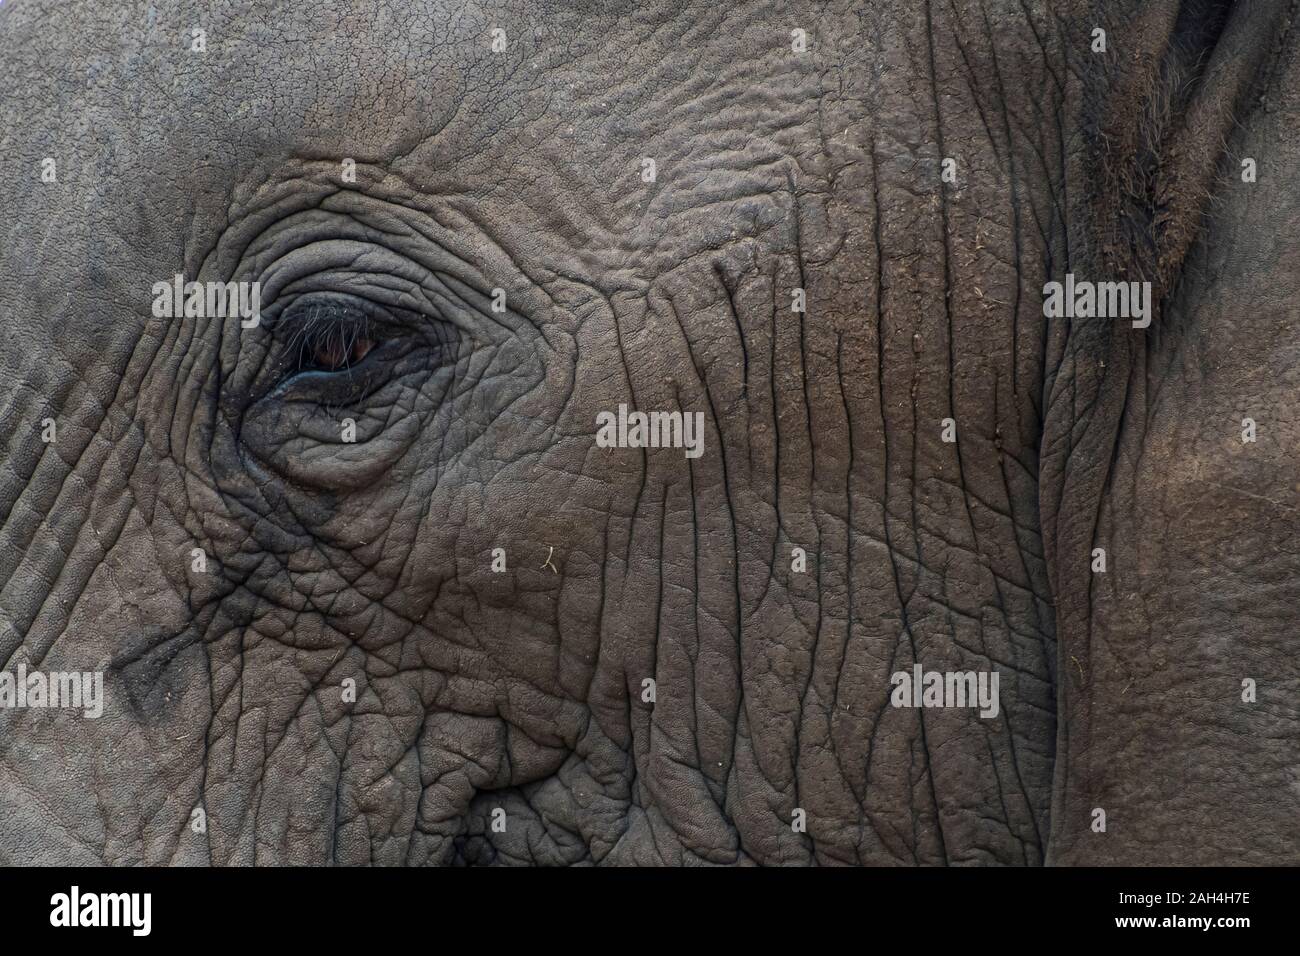 Portrait of an Elephant's Eye and Face in South Africa Stock Photo